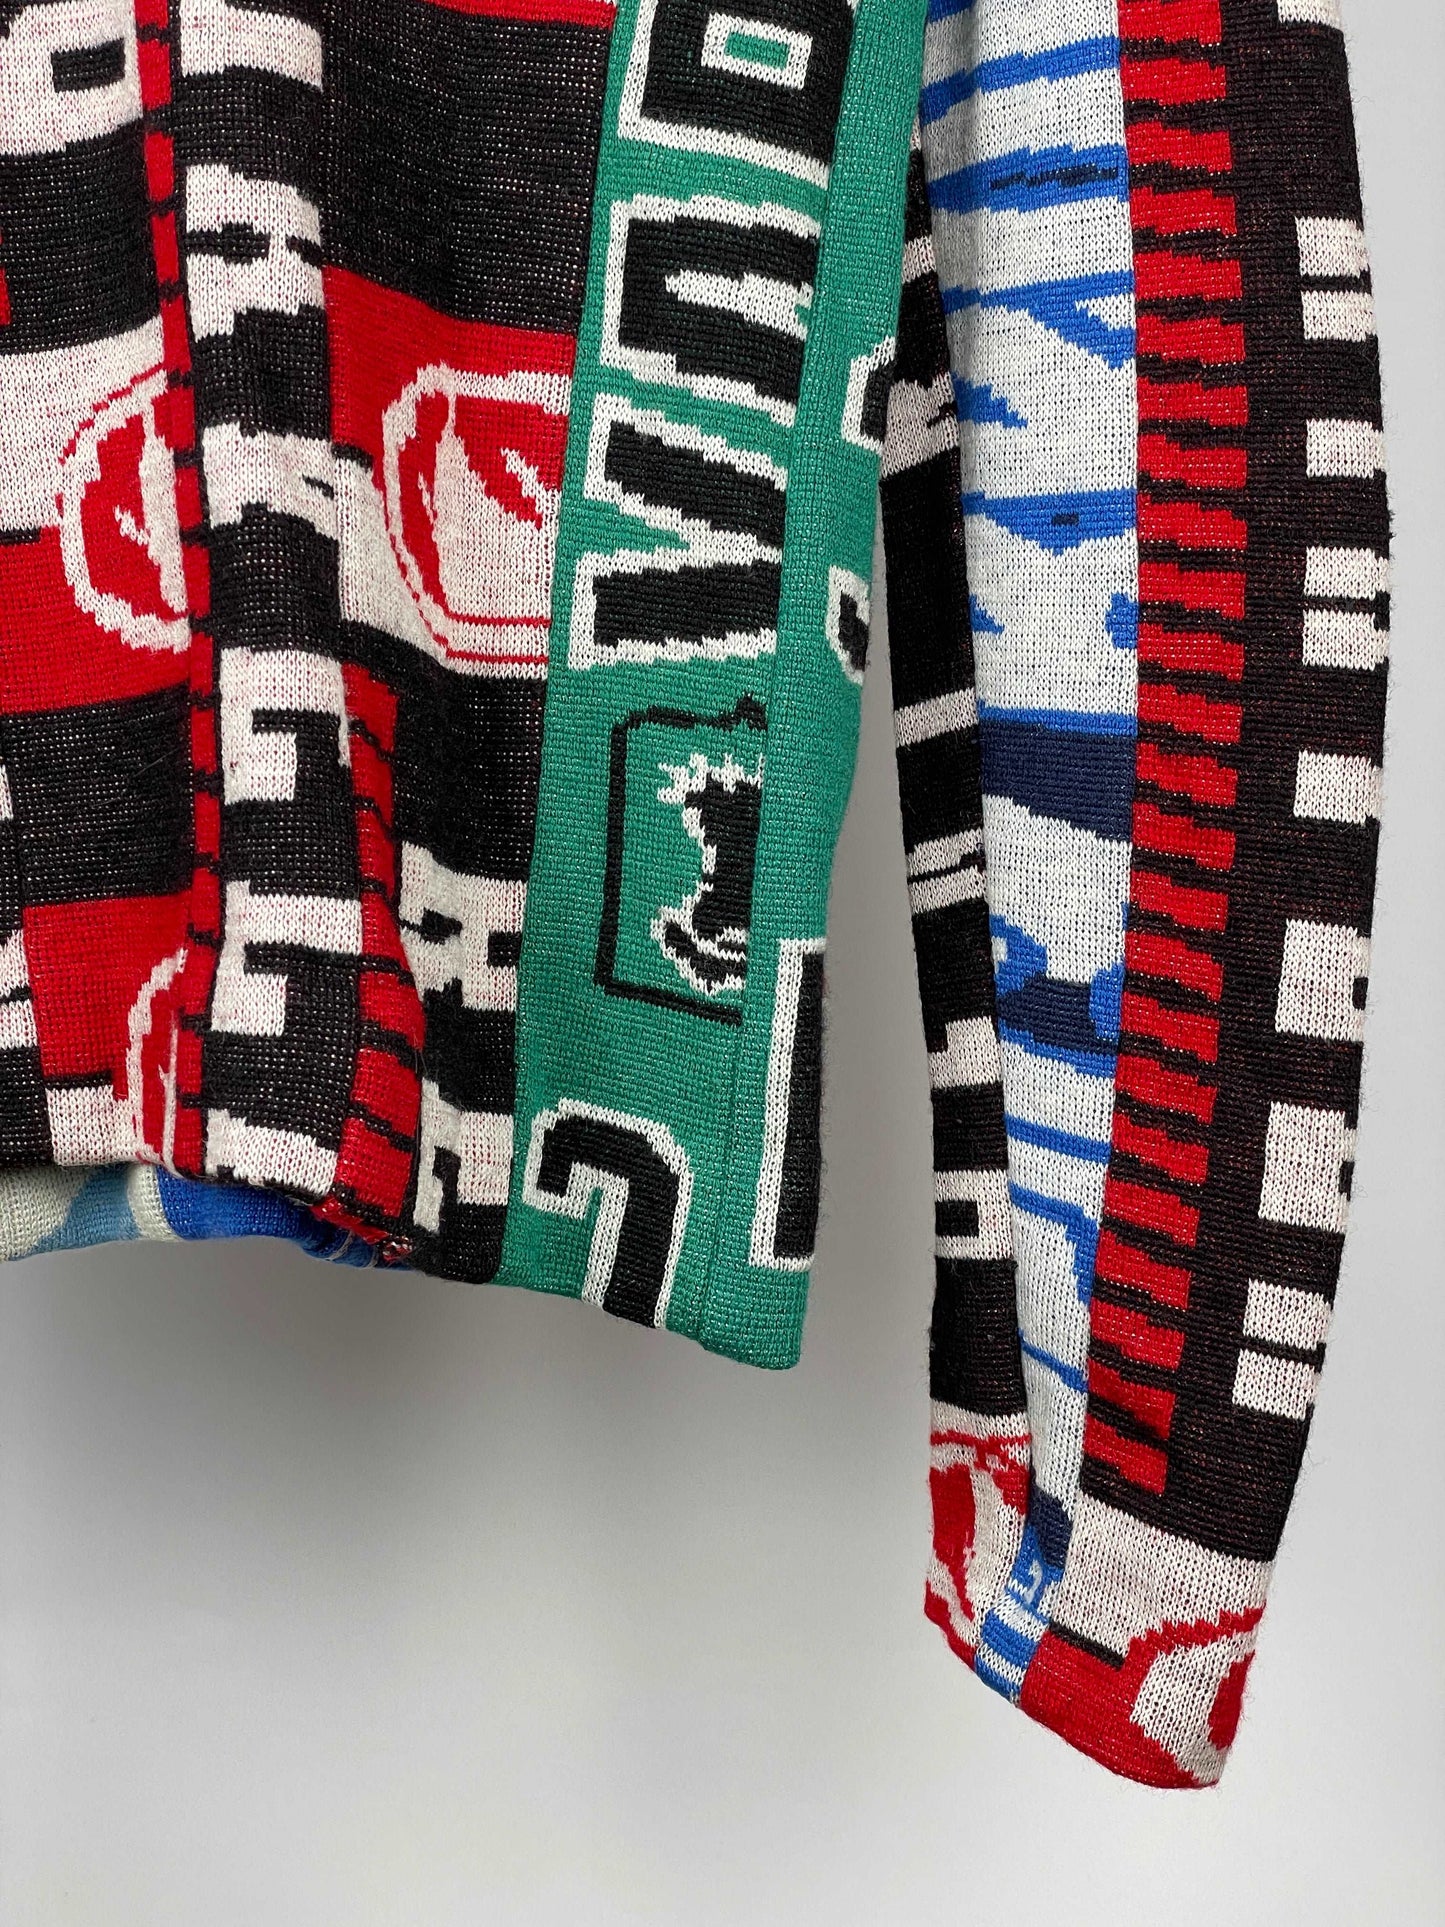 H&M x Maison Margiela Reconstructed Scarf Sweater